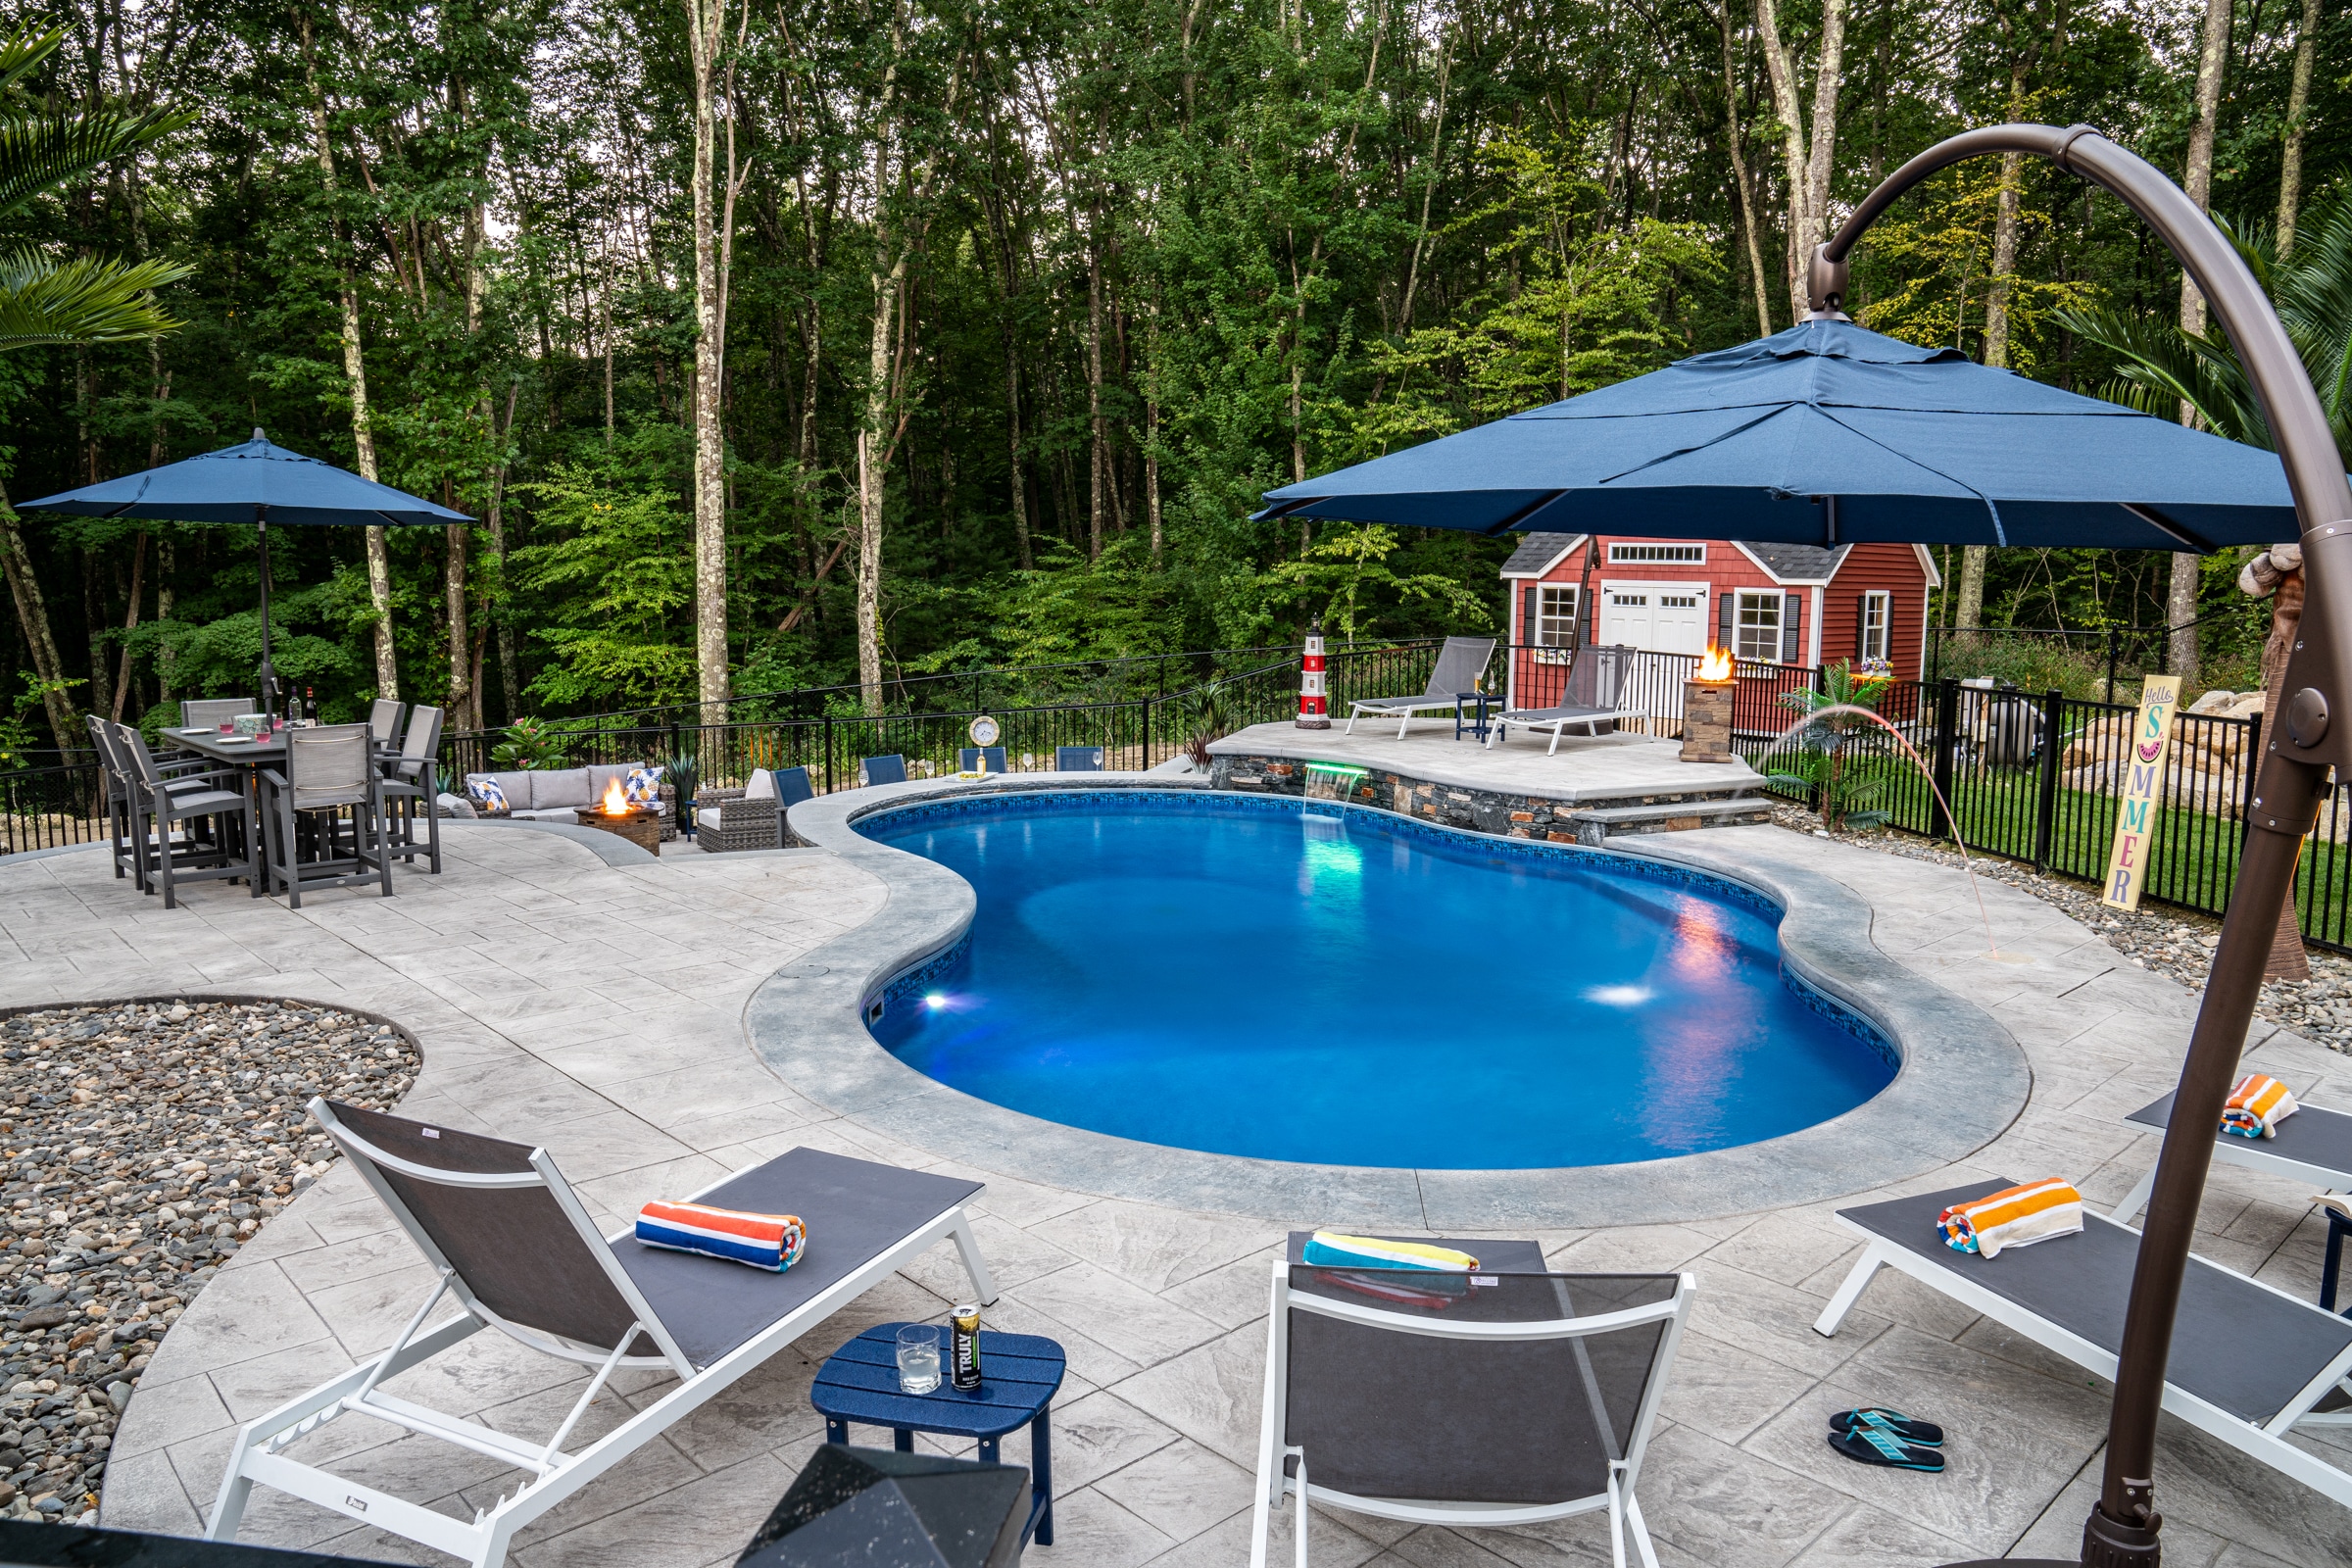 This hardscape with a stamped concrete pool deck, poolside bar, sundeck, and water feature built by Dex by Terra, is a paradise.